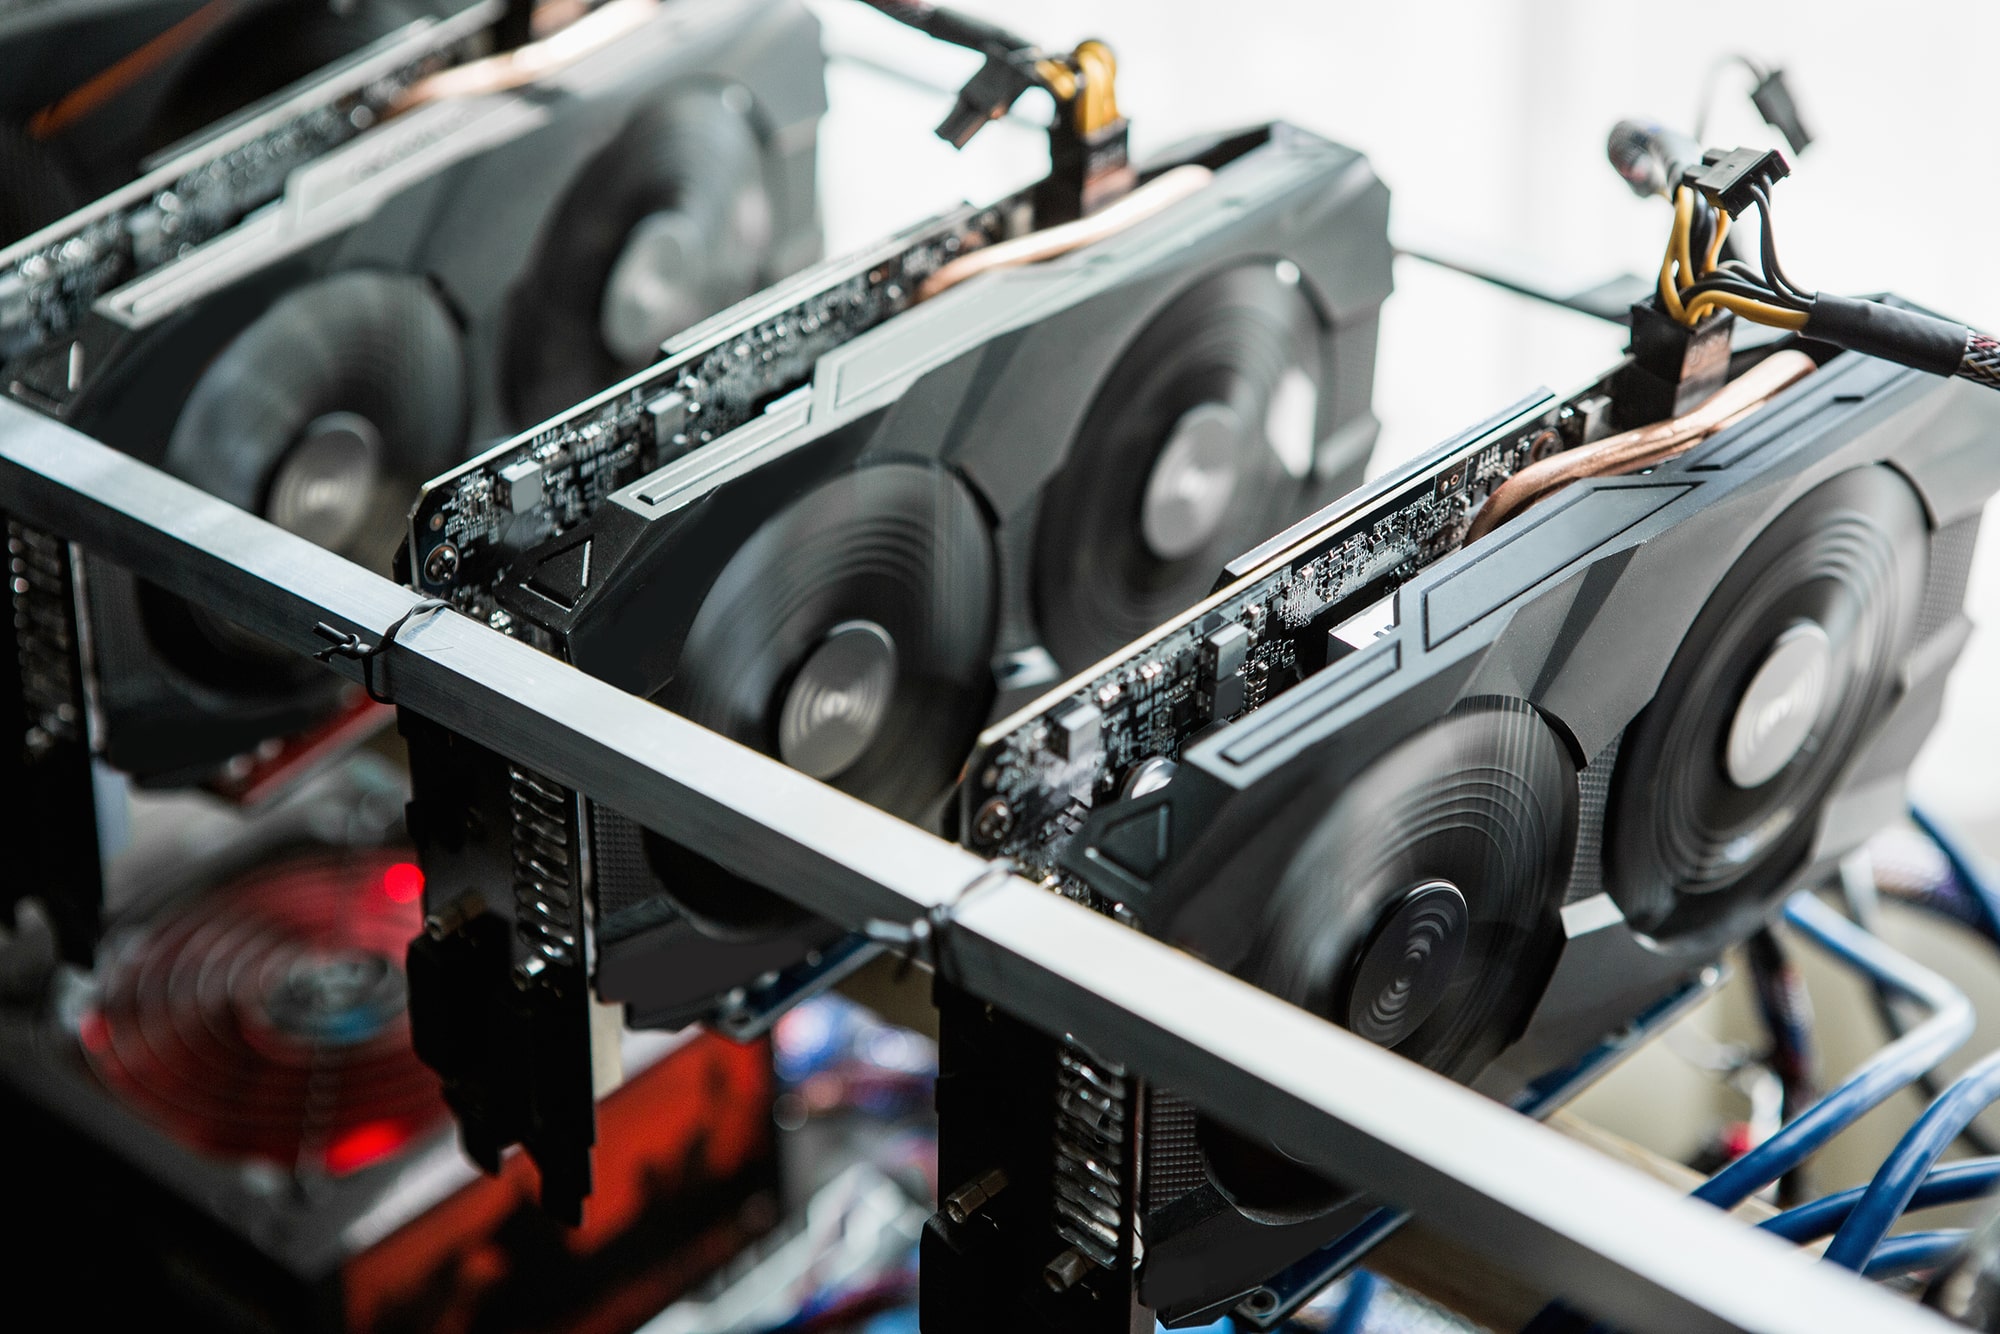 Bitmain stops sales of crypto mining machines following China’s crackdown